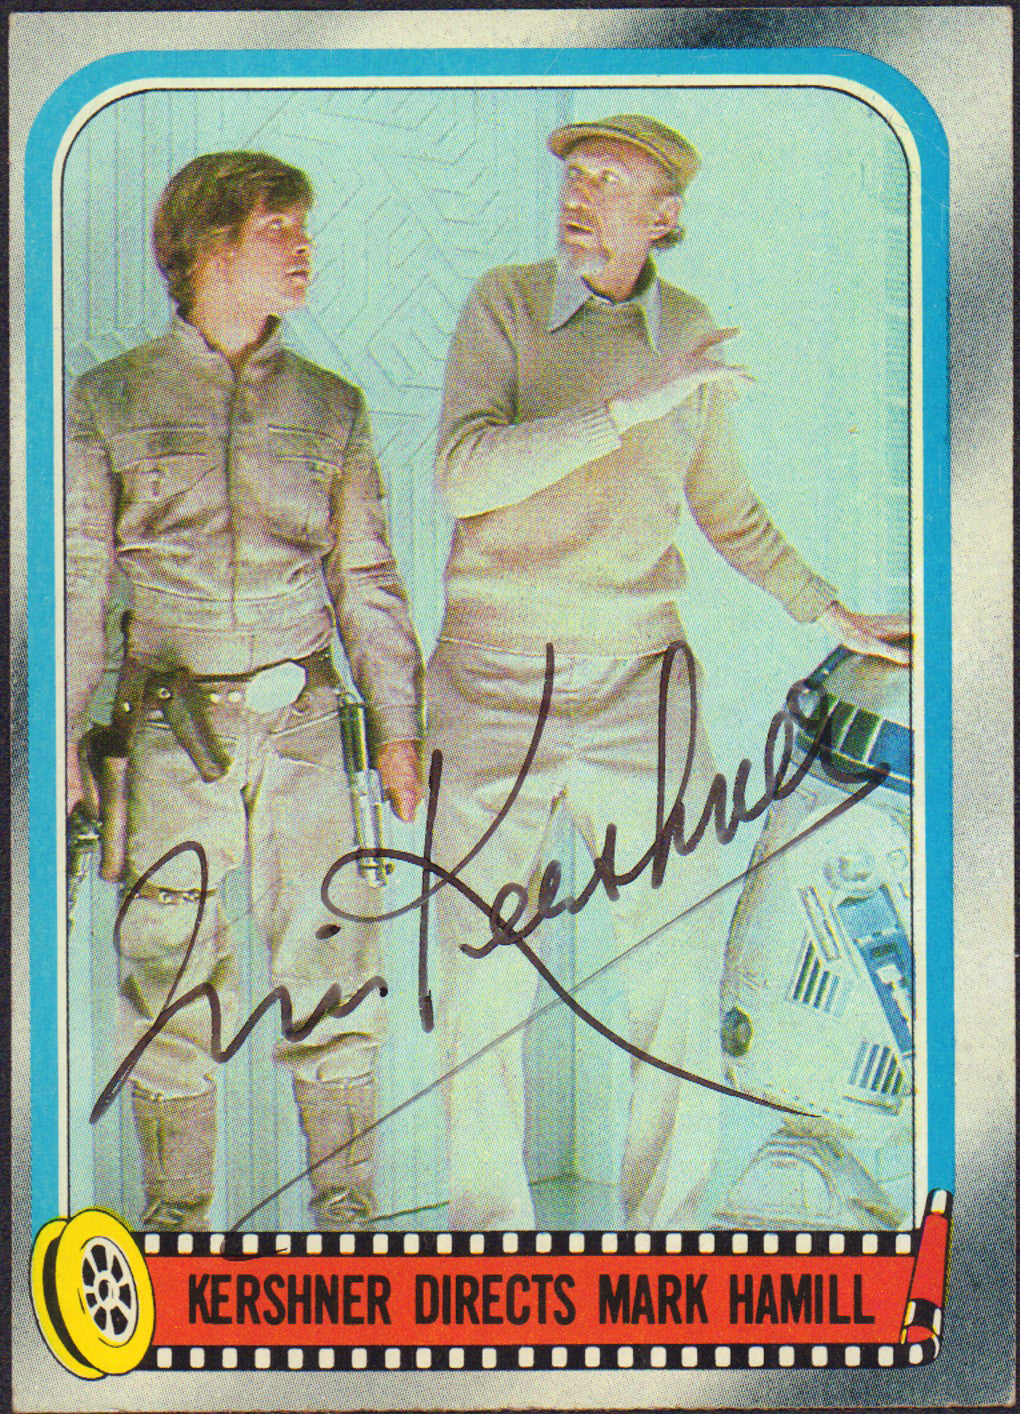 
                  
                    Star Wars: The Original Trilogy Topps Trading Cards 20pc LOT Signed by Harrison Ford, Carrie Fisher, Mark Hamill, Irvin Kershner, Baker, Mayhew, Daniels, & More
                  
                